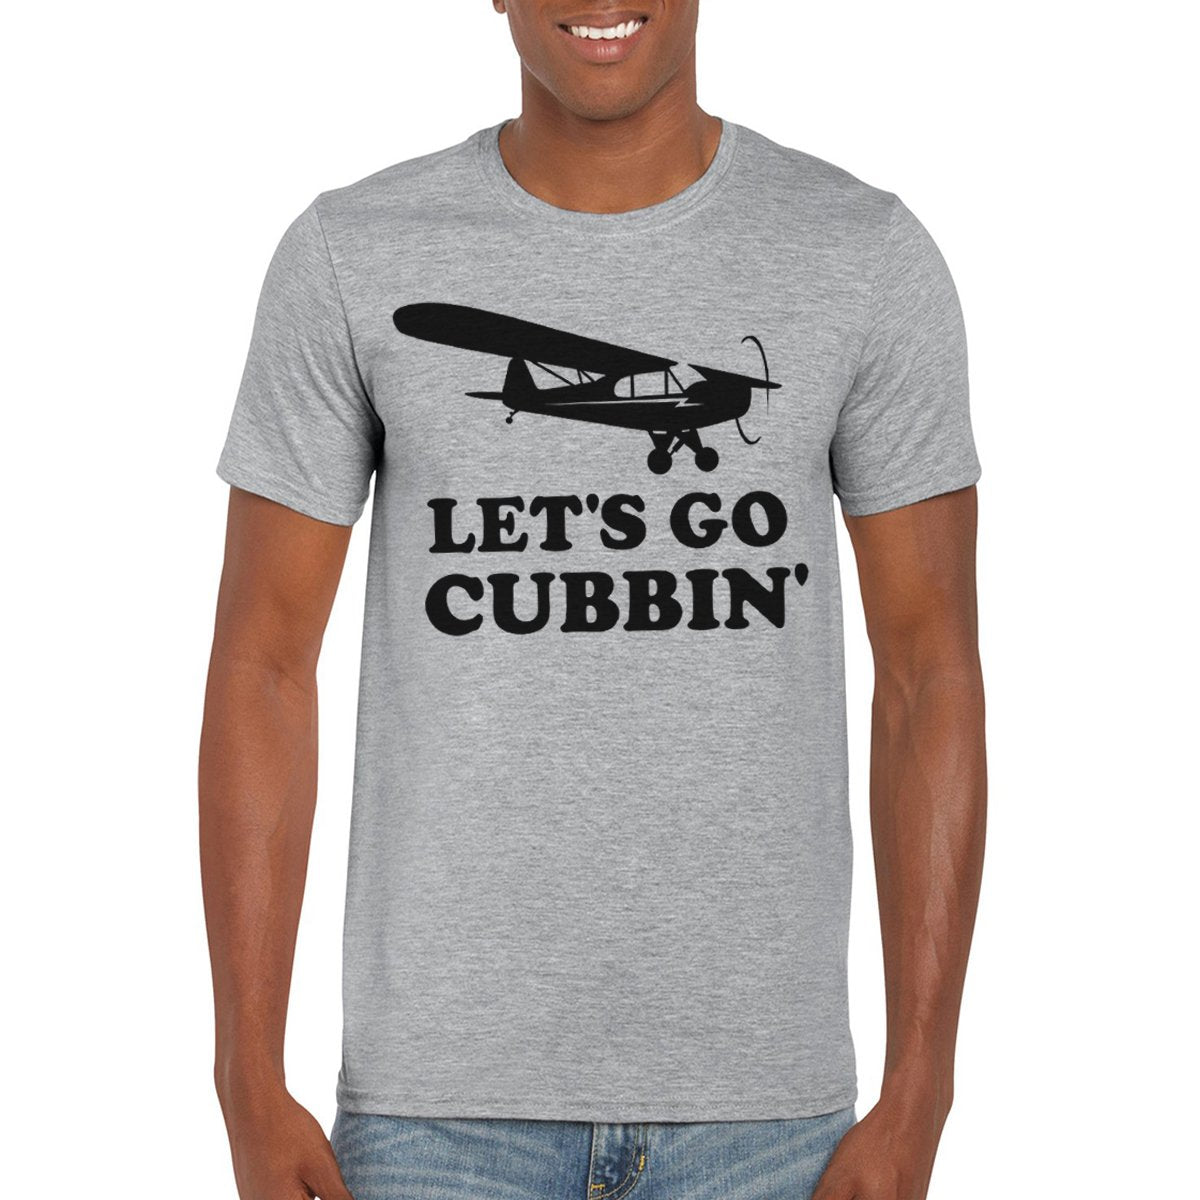 LET'S GO CUBBIN' Unisex Semi-Fitted T-Shirt